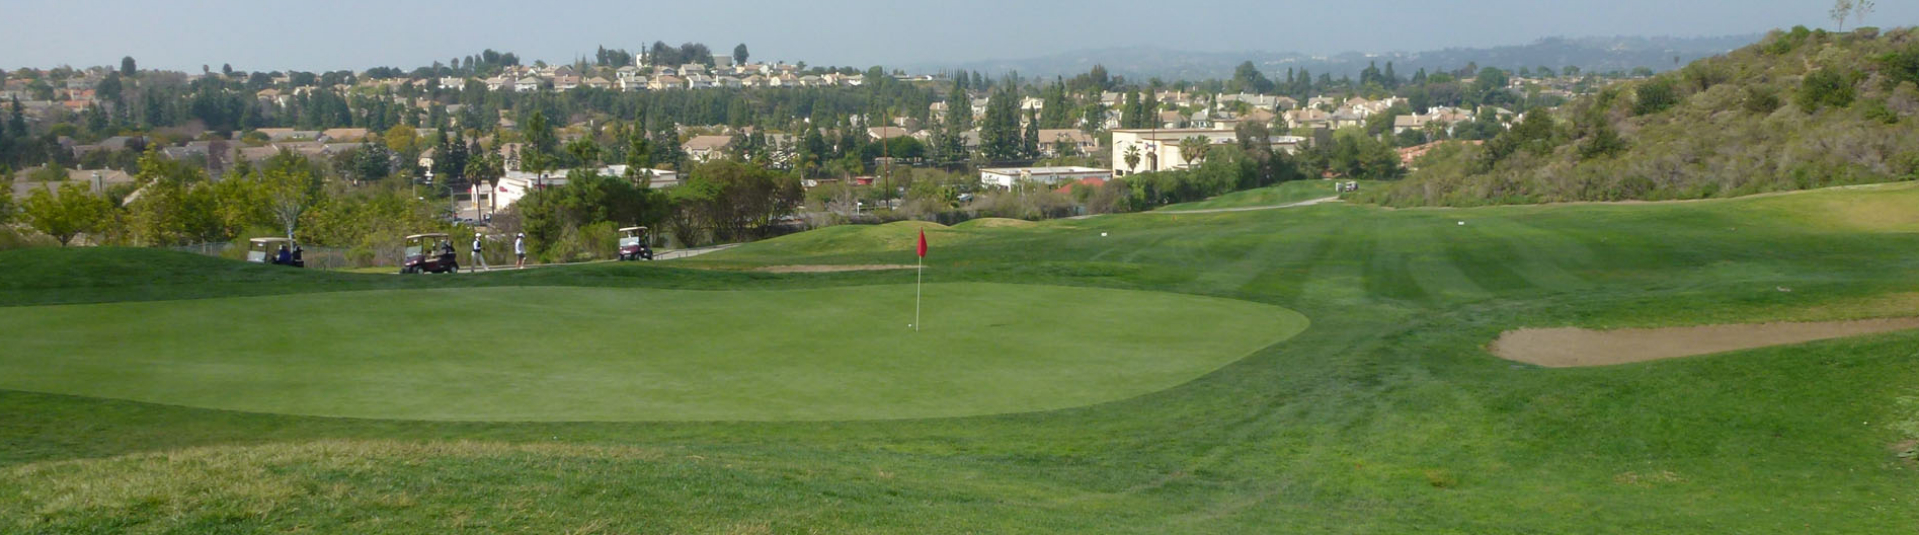 view of golf course green with town in background